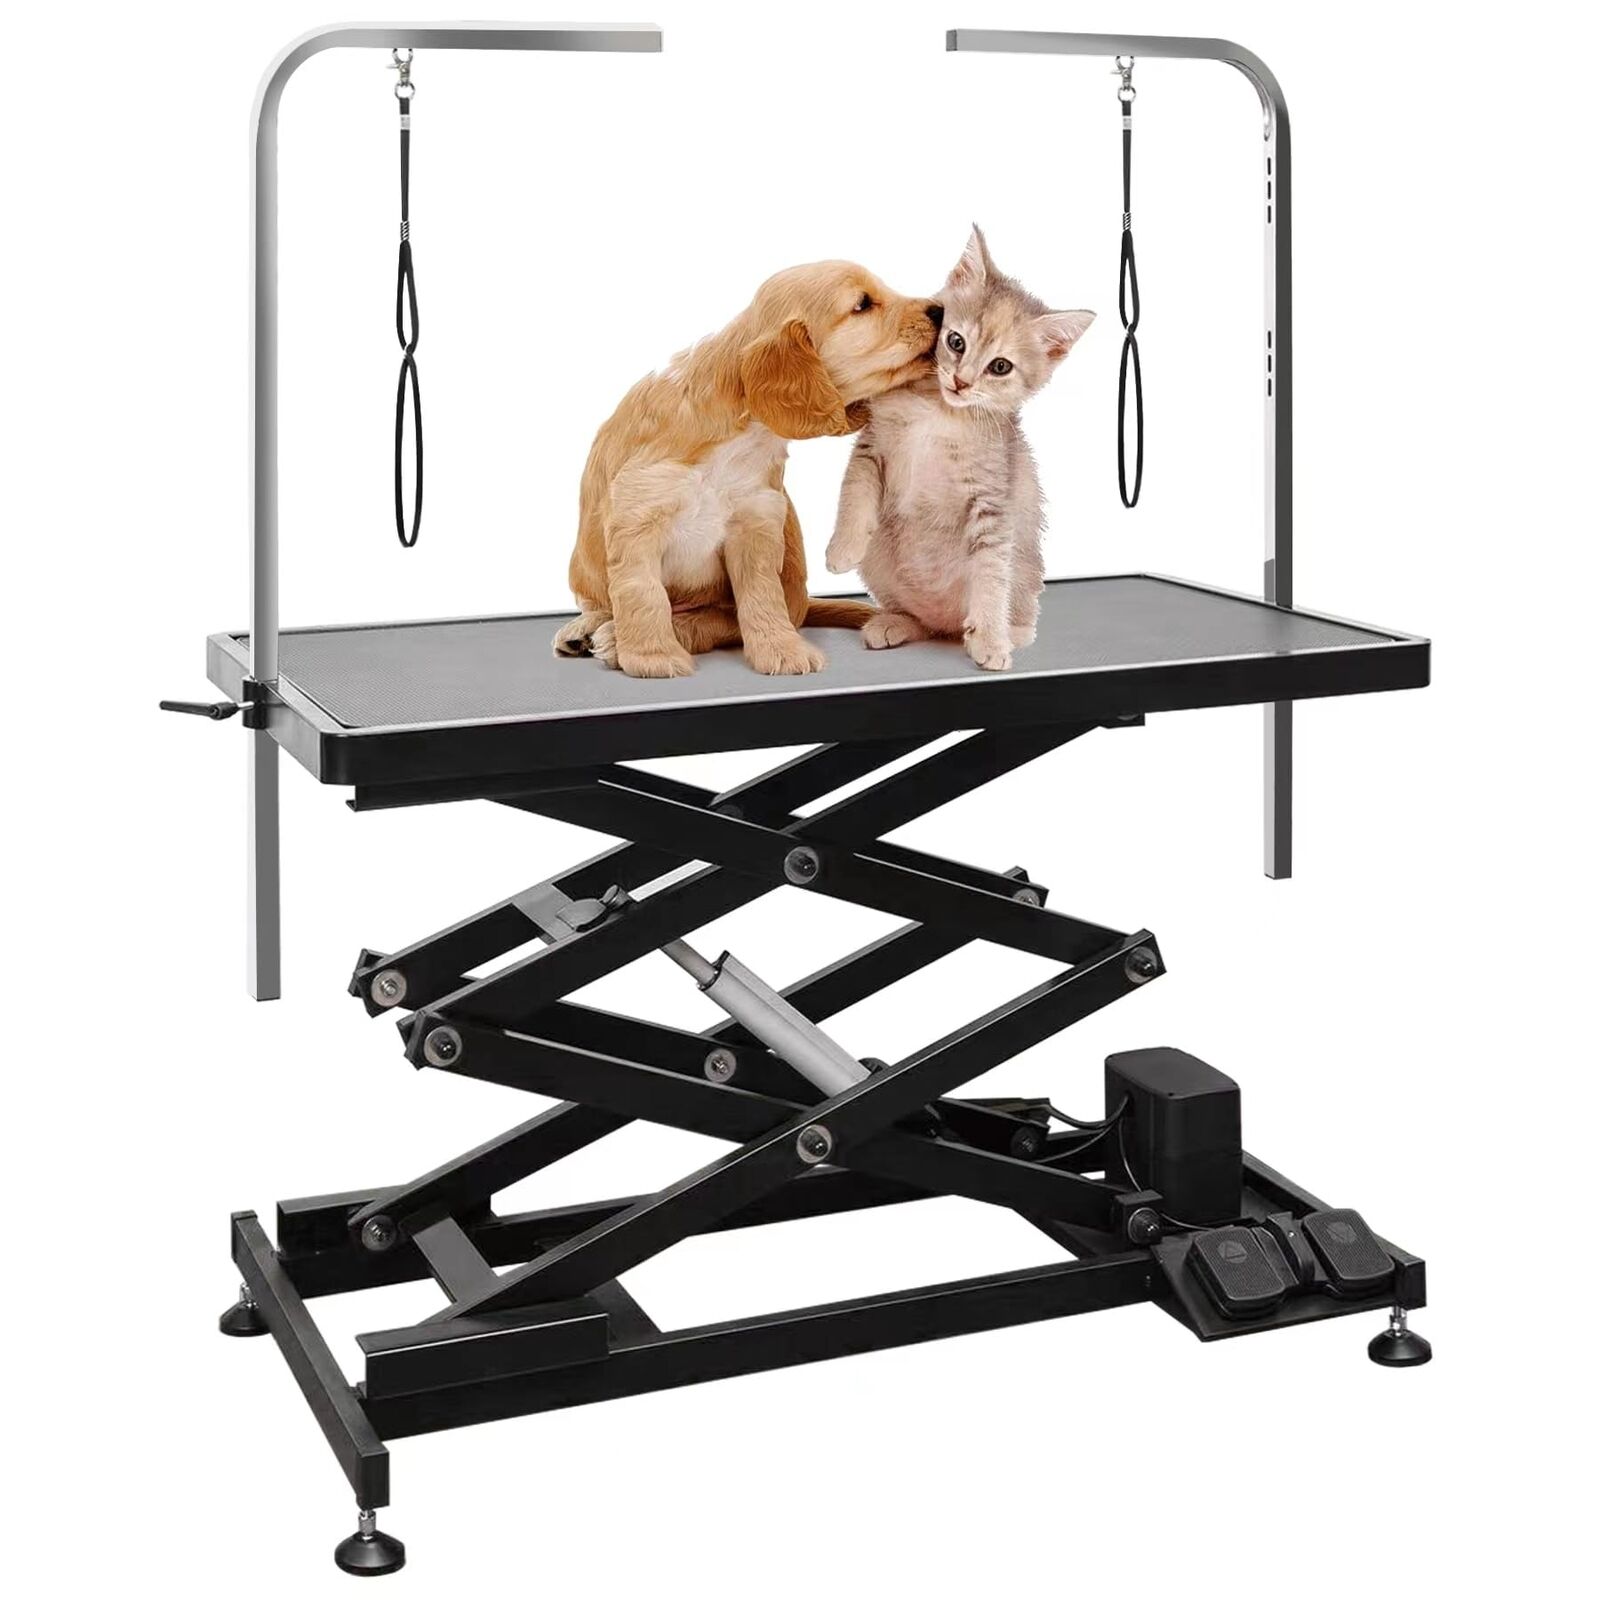 Electric Pet Dog Grooming Table, Heavy Duty Grooming Table Professional Doubl...